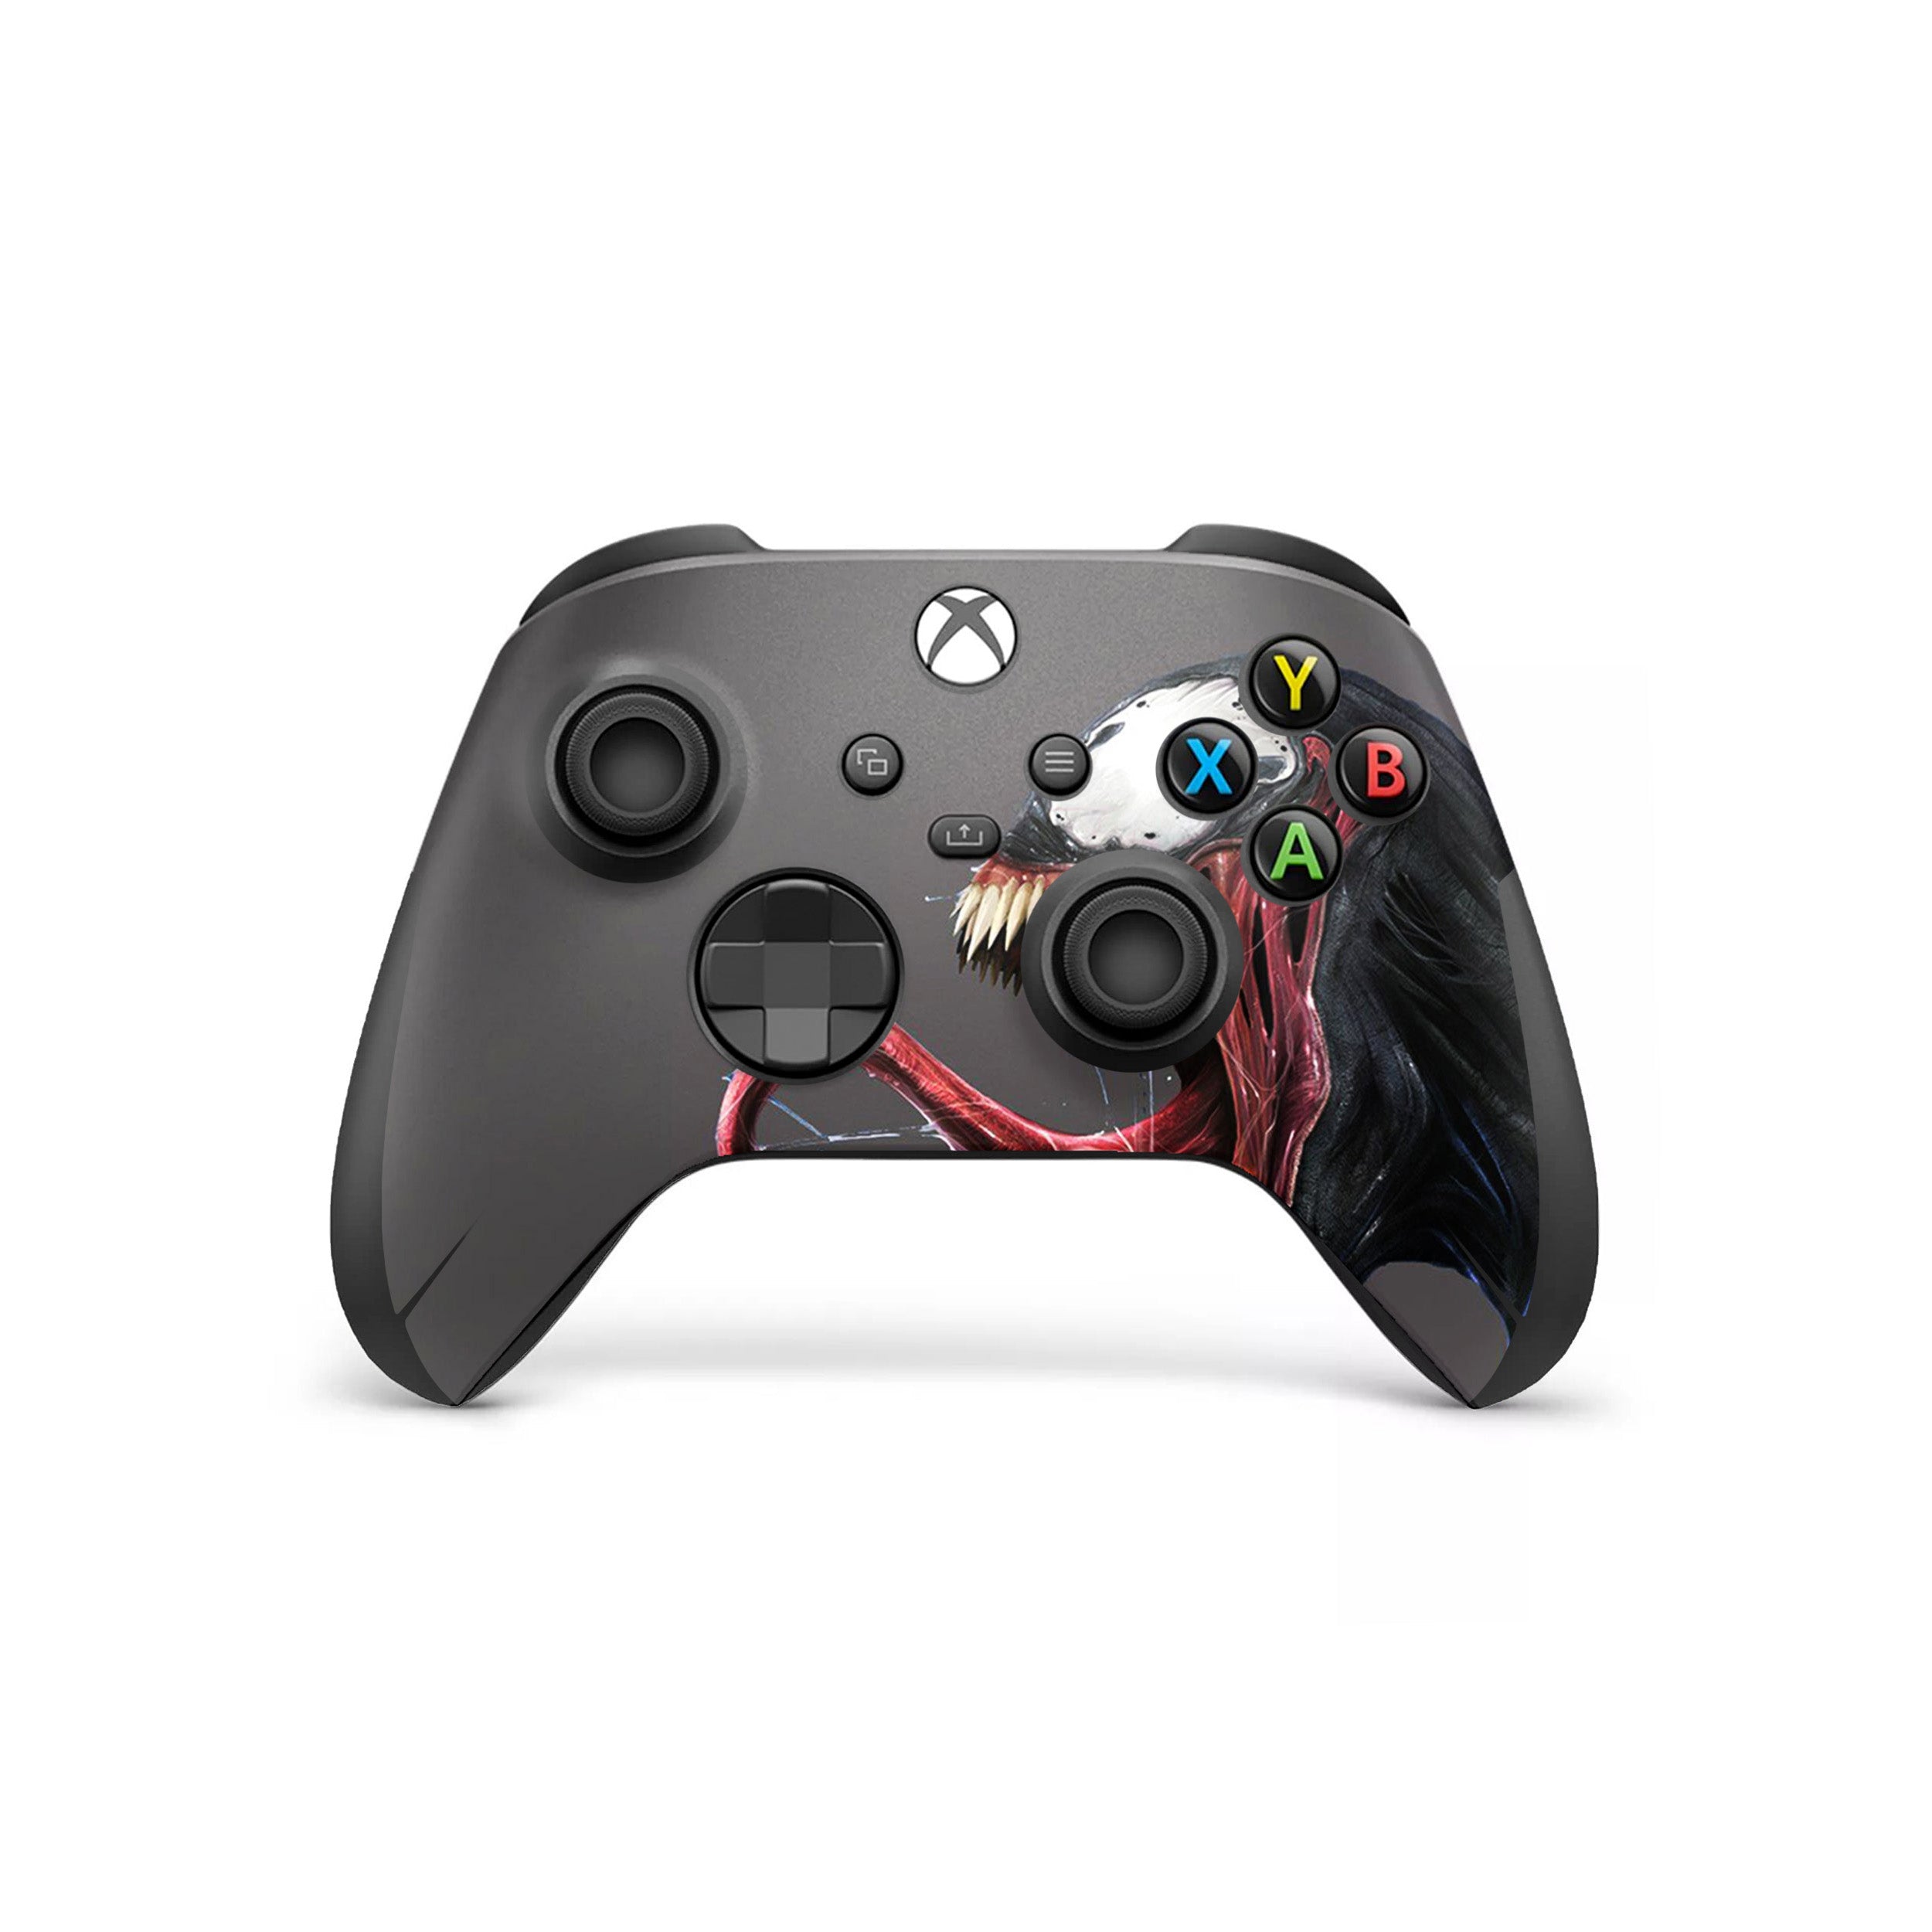 A video game skin featuring a Marvel Venom design for the Xbox Wireless Controller.